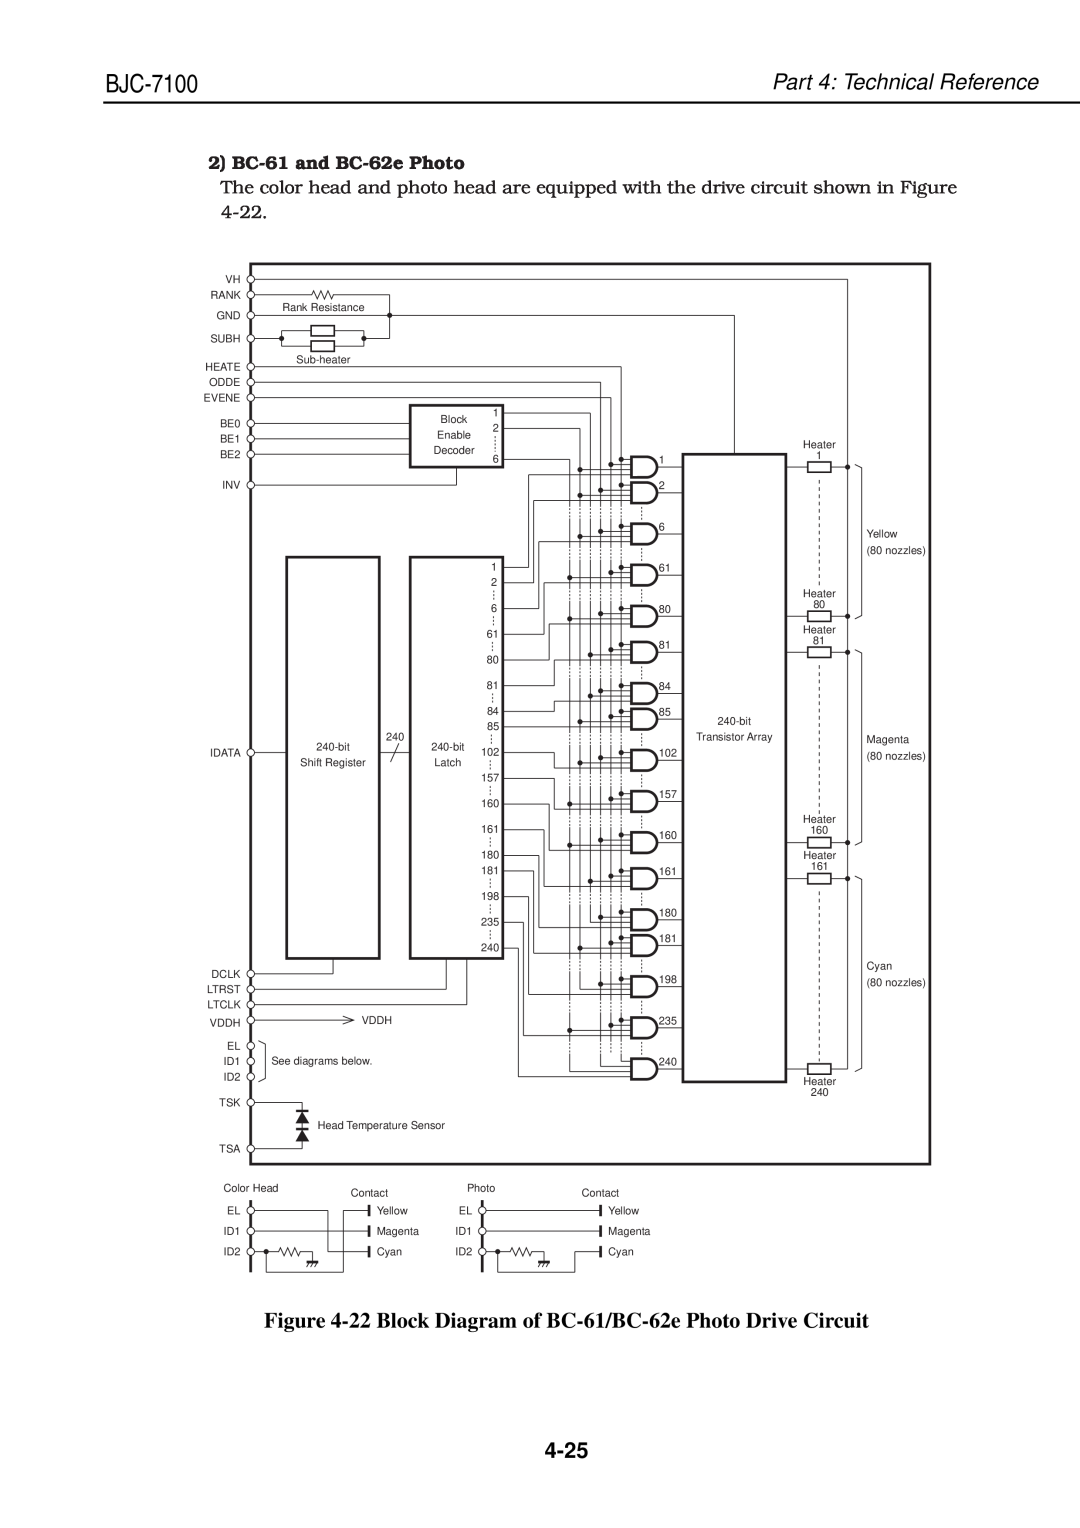 Canon QY8-1360-000 manual 22 Block Diagram of BC-61/BC-62e Photo Drive Circuit, 4-25, BJC-7100, Part 4 Technical Reference 